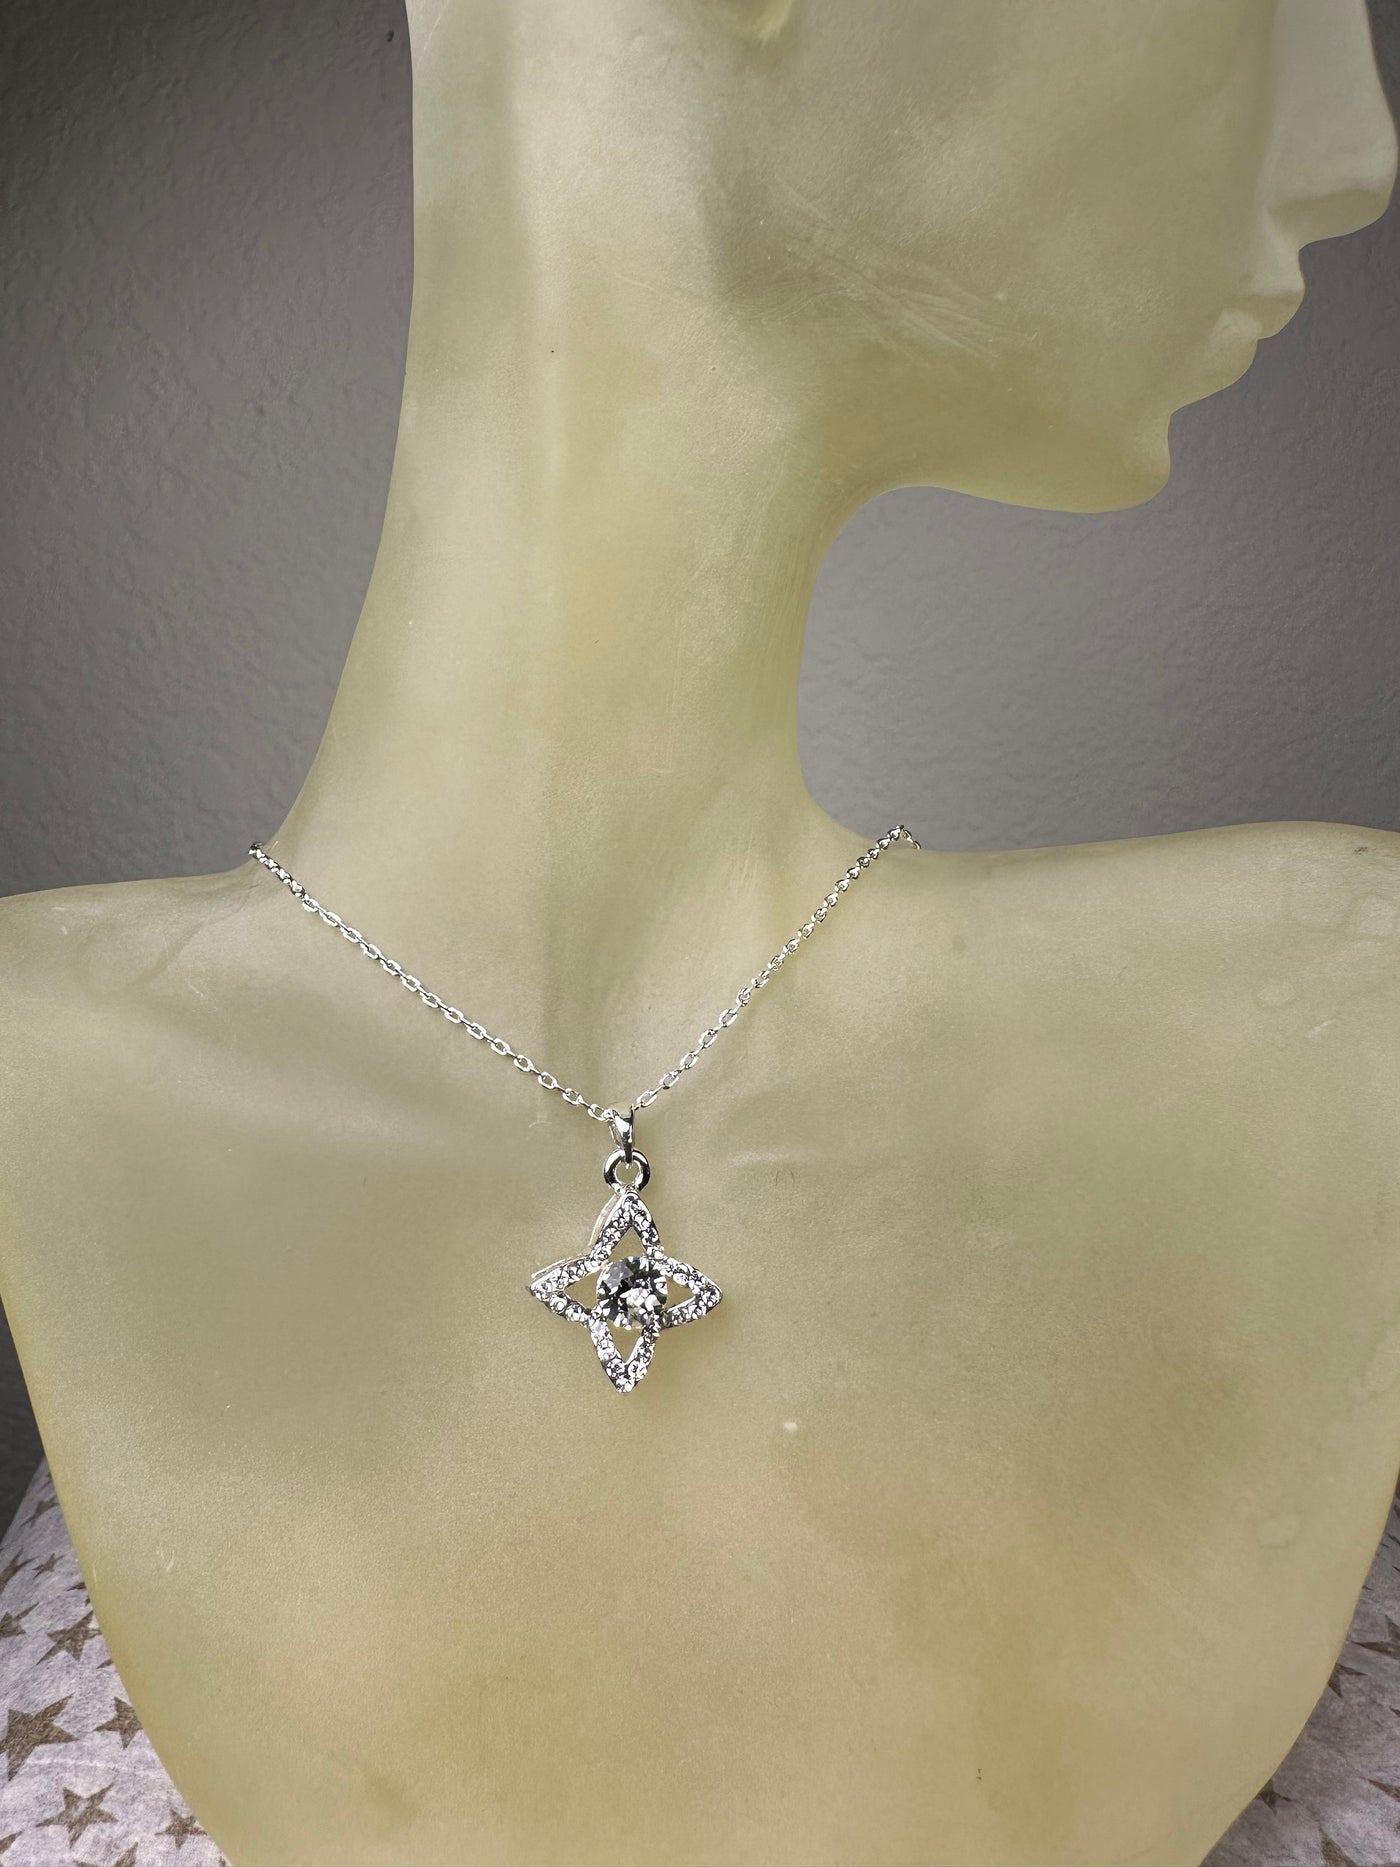 Silver Tone Four Pointed Crystal Pendant Necklace